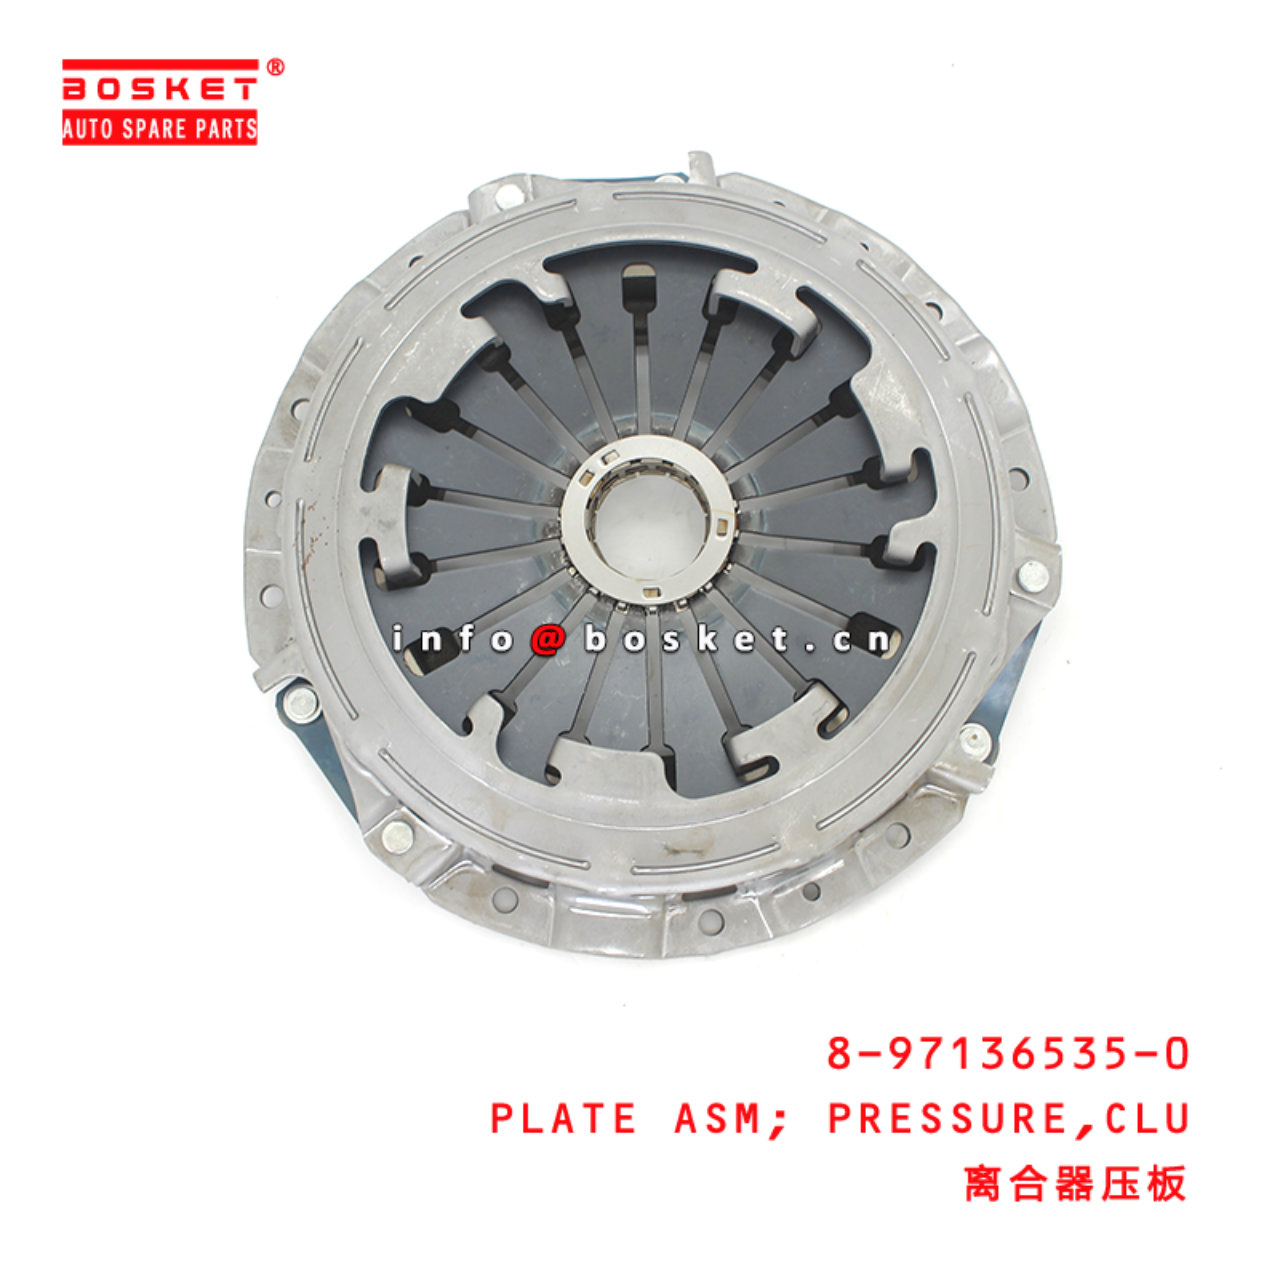 8-97136535-0 Clutch Pressure Plate Assembly suitable for ISUZU 6VE1 8971365350